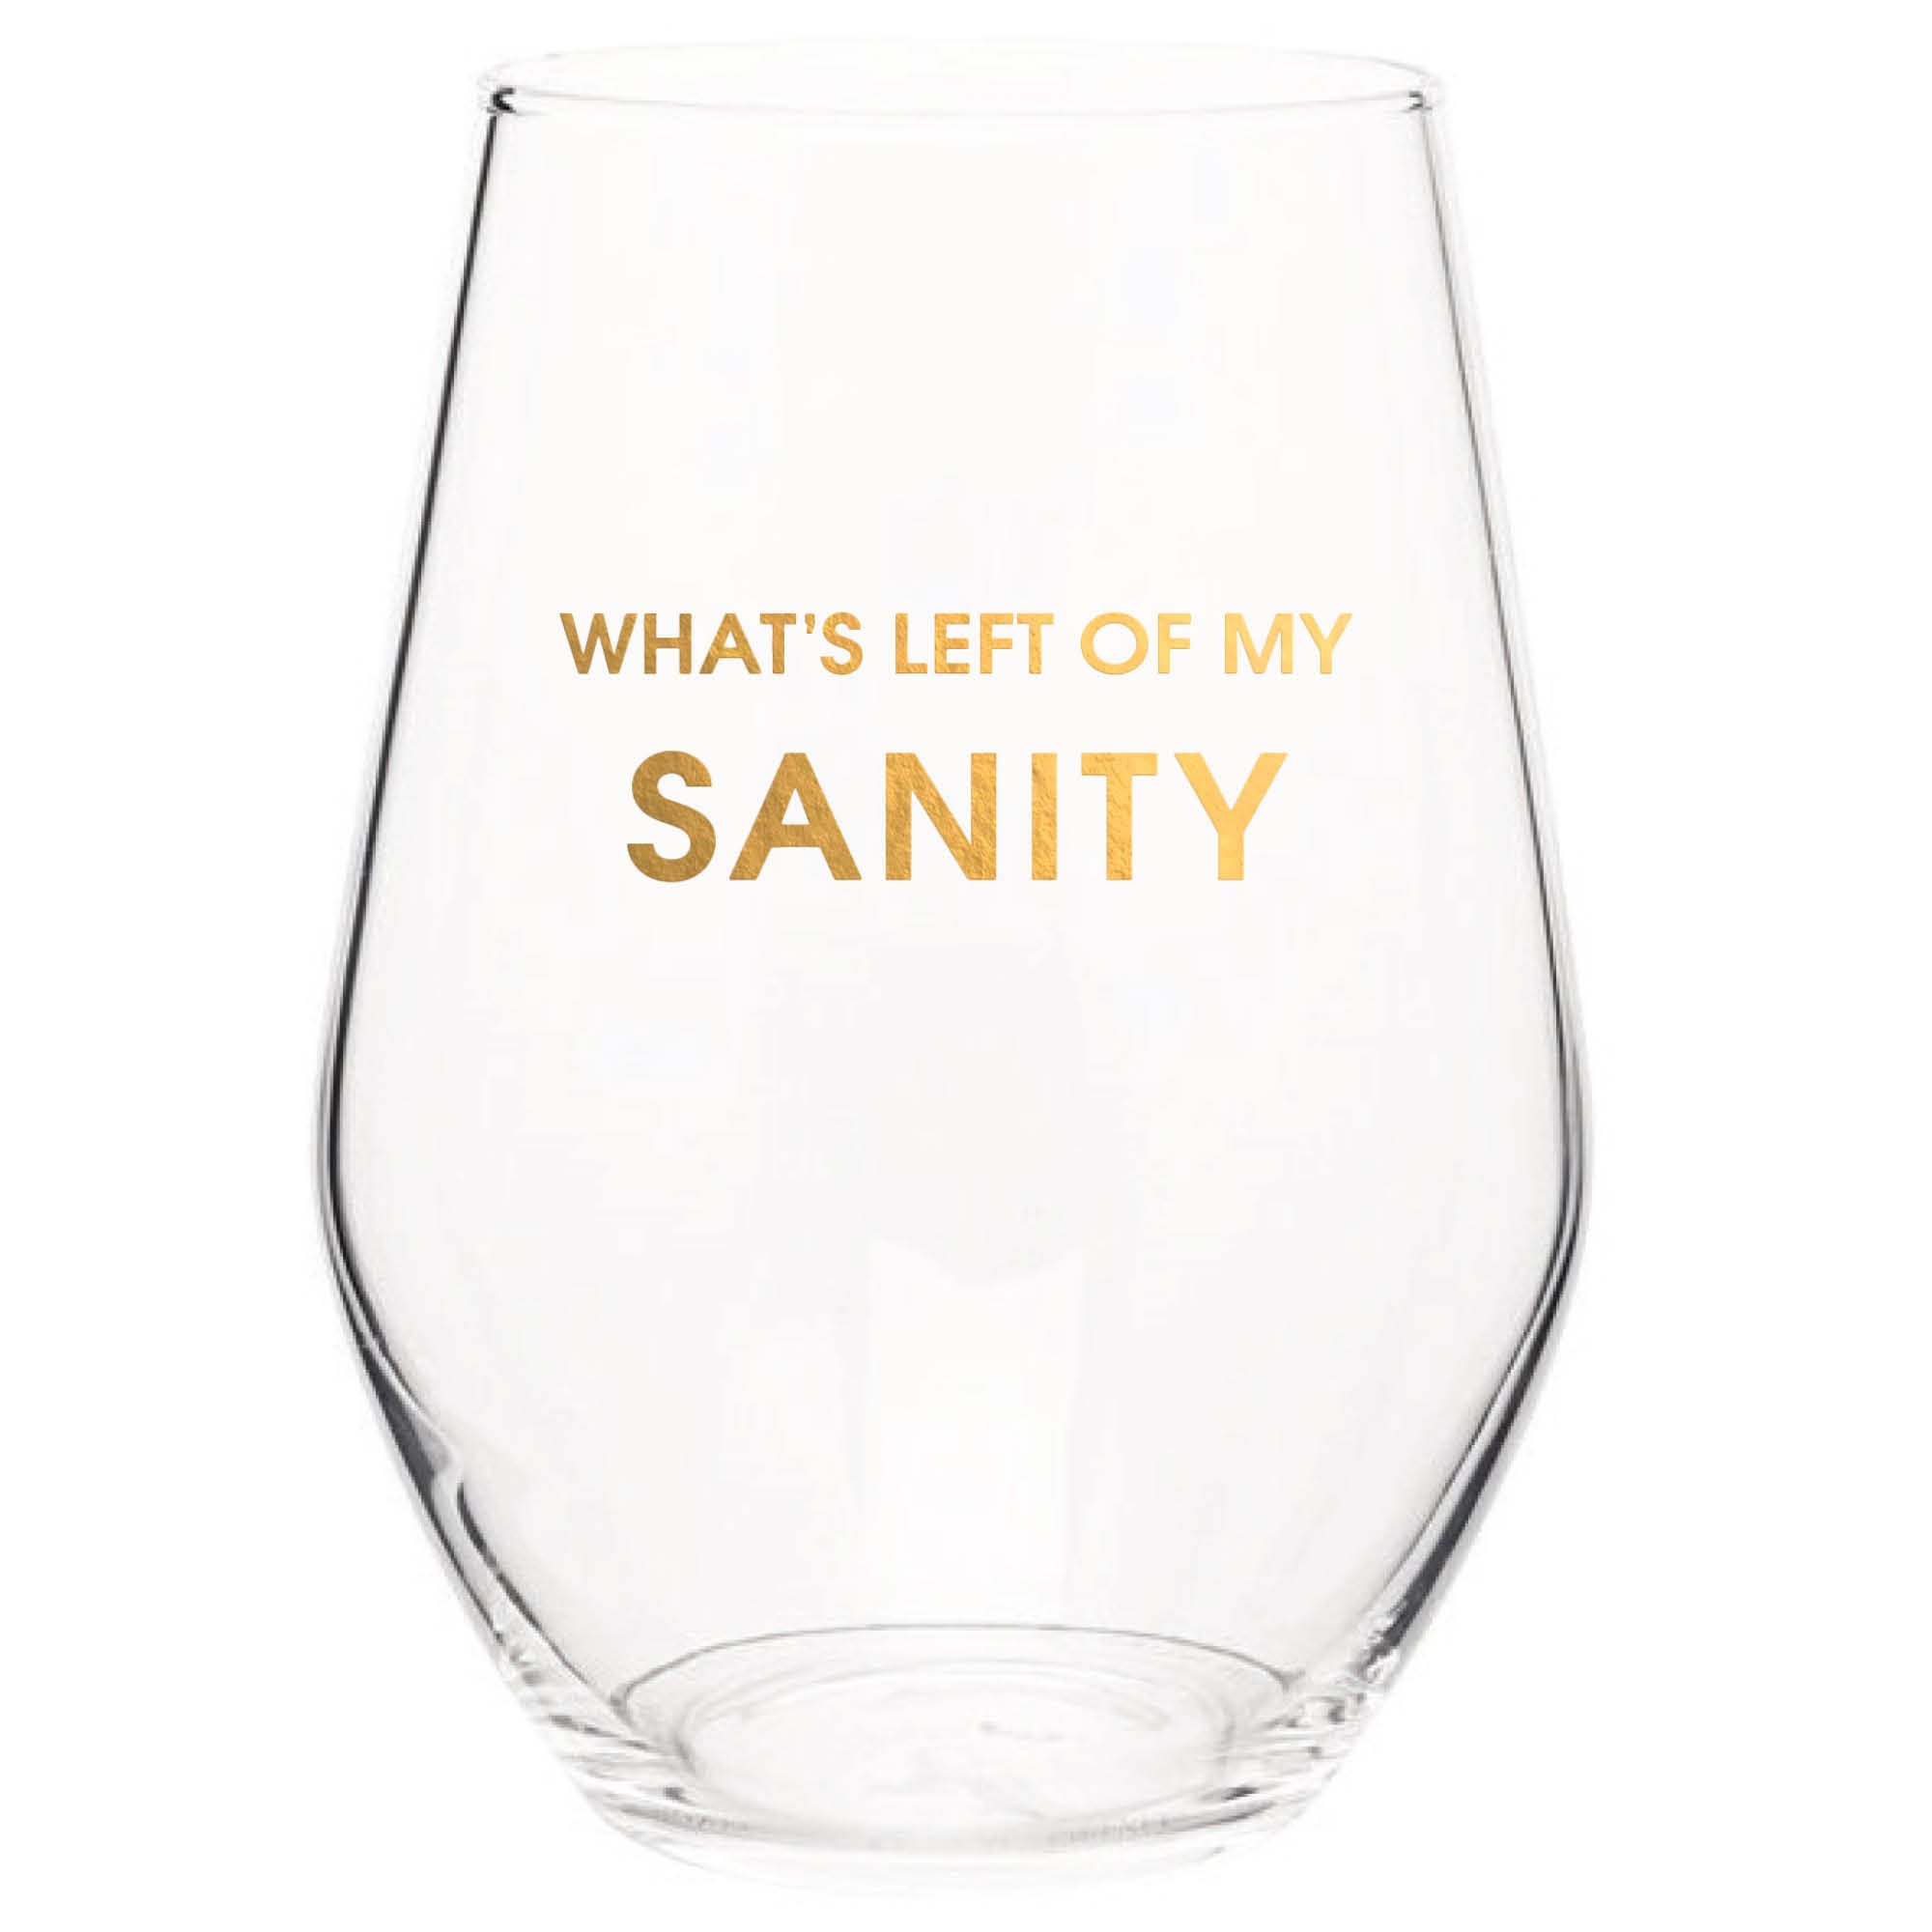 Left of My Sanity- Gold Foil Stemless Wine Glass (Slight Imperfections)